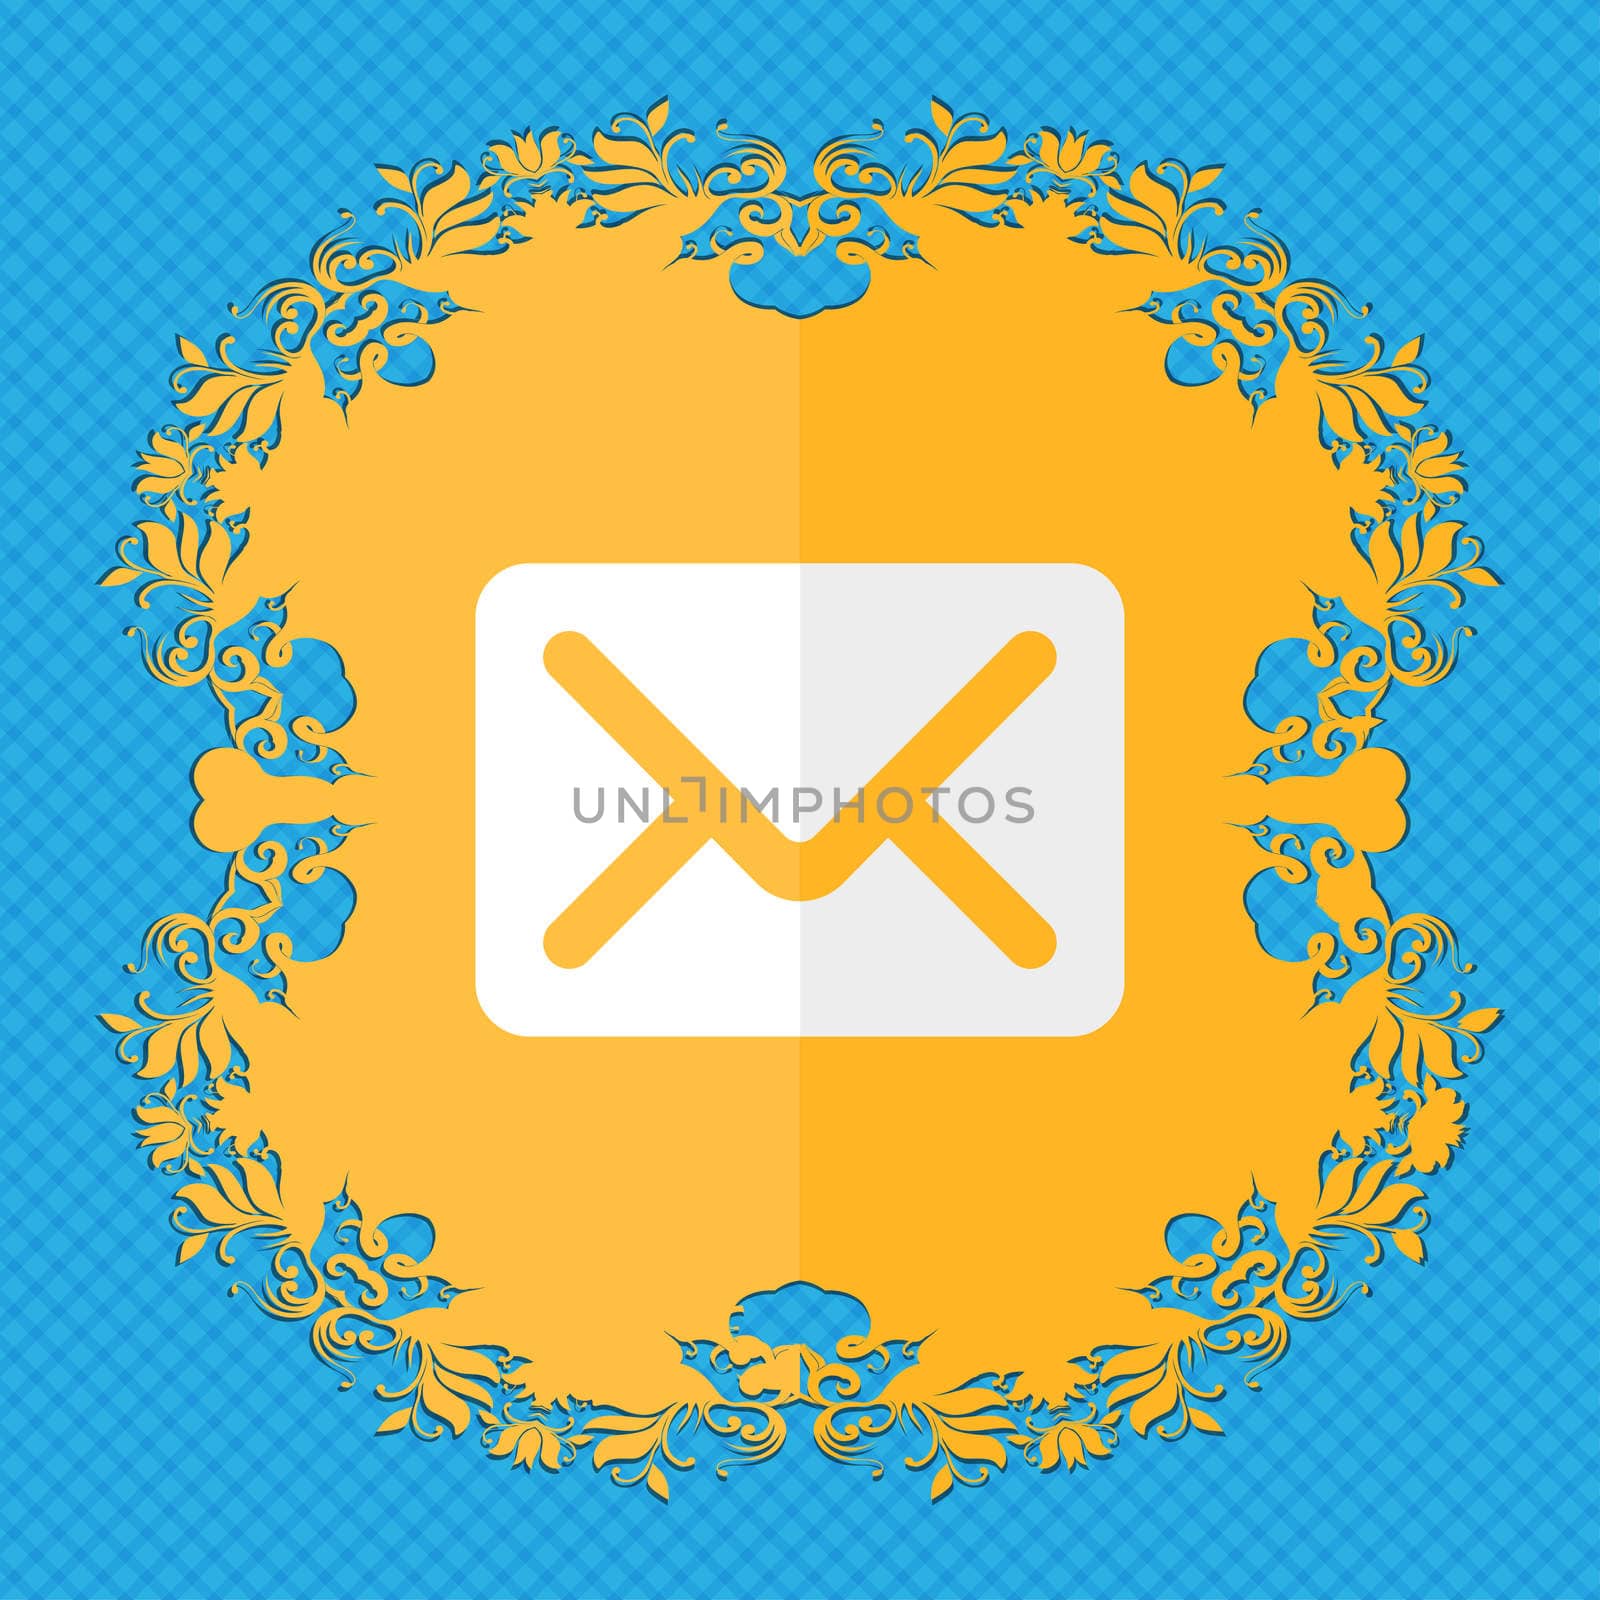 Mail, envelope, letter. Floral flat design on a blue abstract background with place for your text. illustration